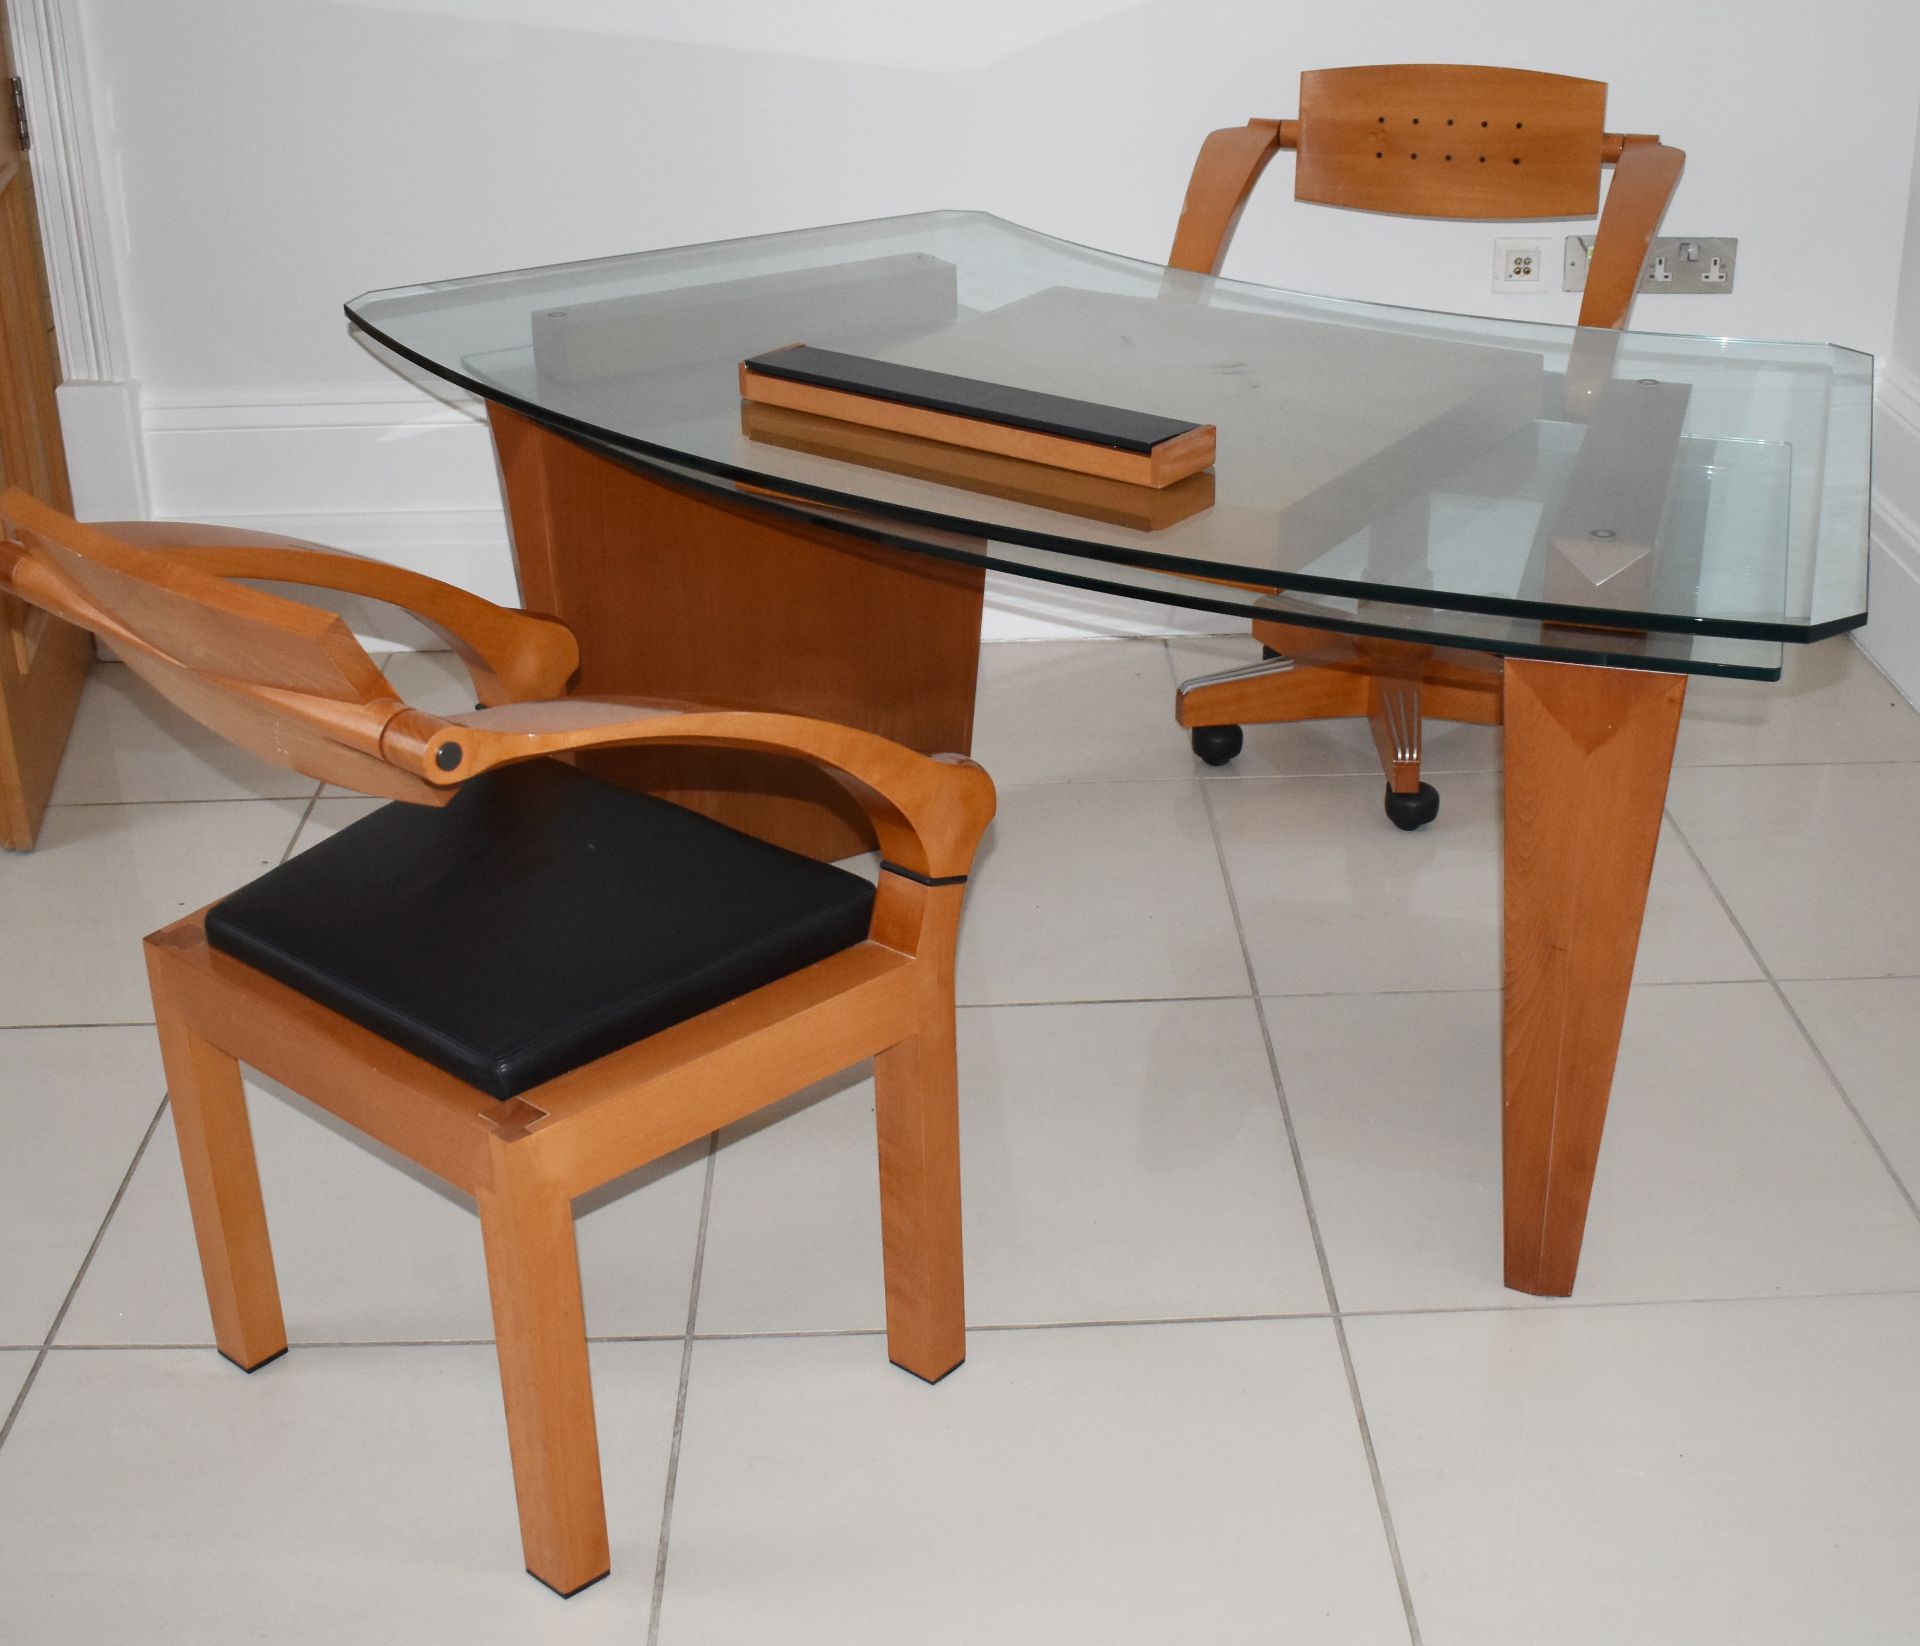 1 x Giorgetti Office Desk With Two Spring Chairs By Massimo Scolari - From an Exclusive Hale